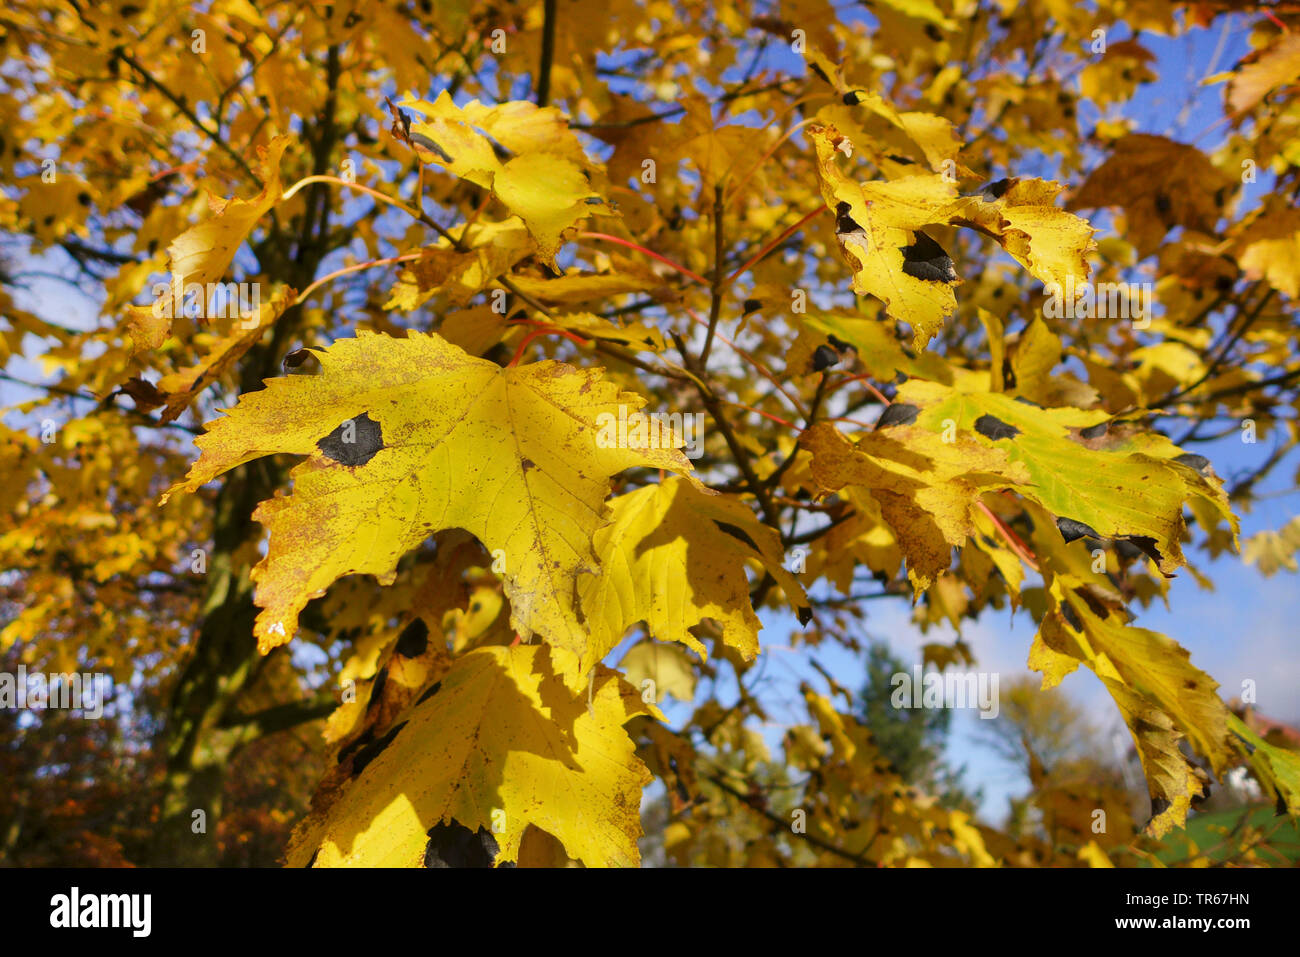 sycamore maple, great maple (Acer pseudoplatanus), autumn leaves with tar spot desease, Germany Stock Photo